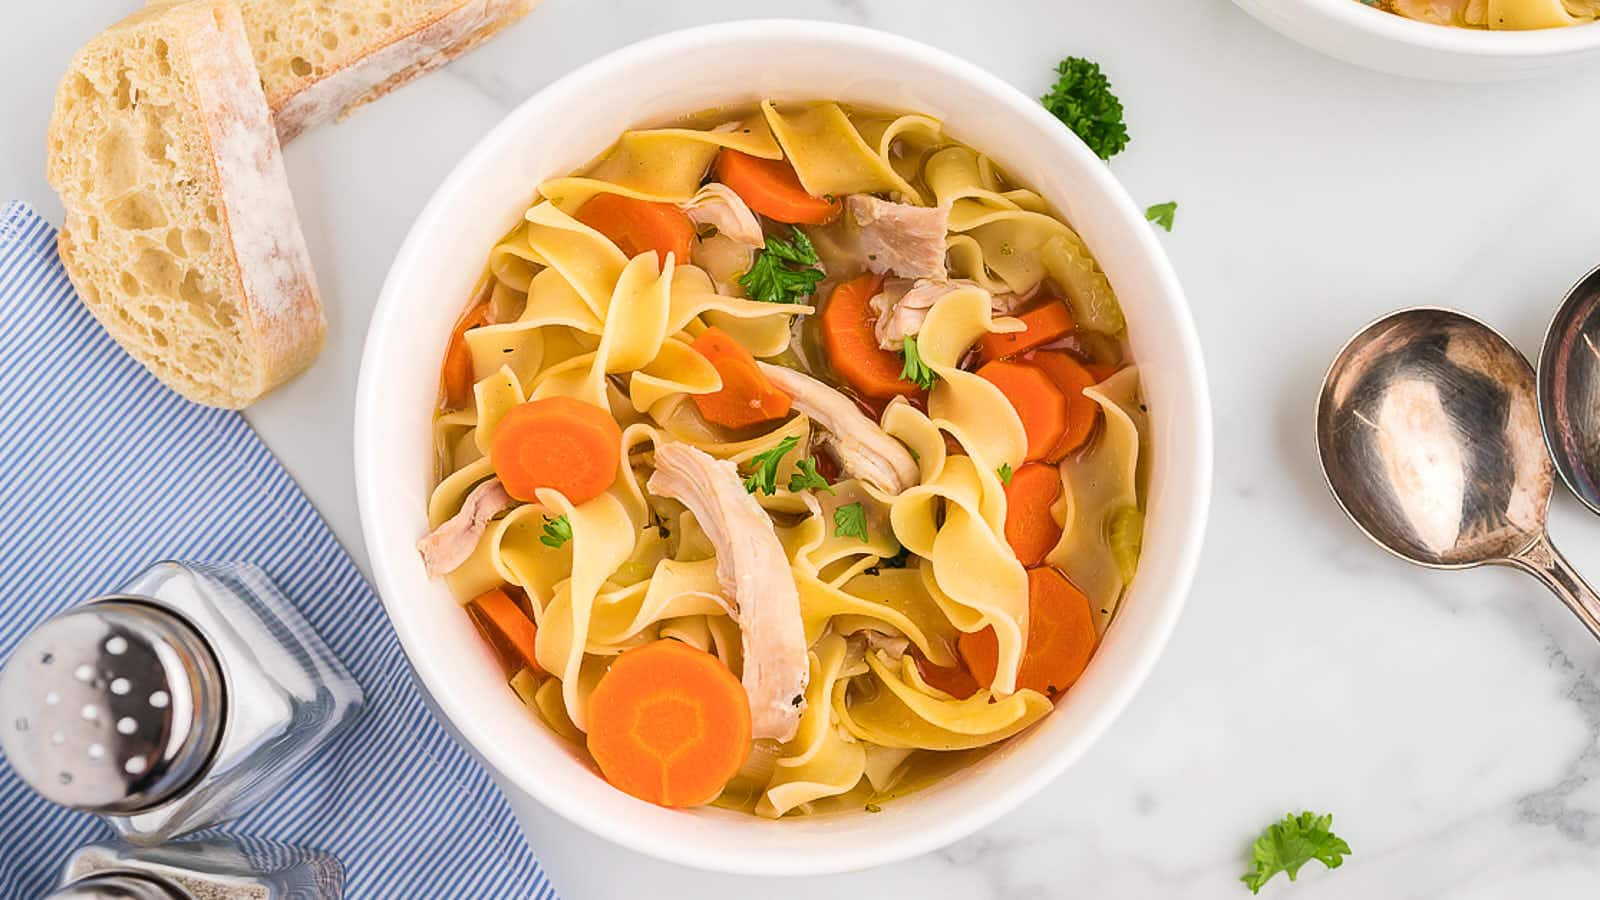 Chicken Noodle soup recipe by Cheerful Cook.